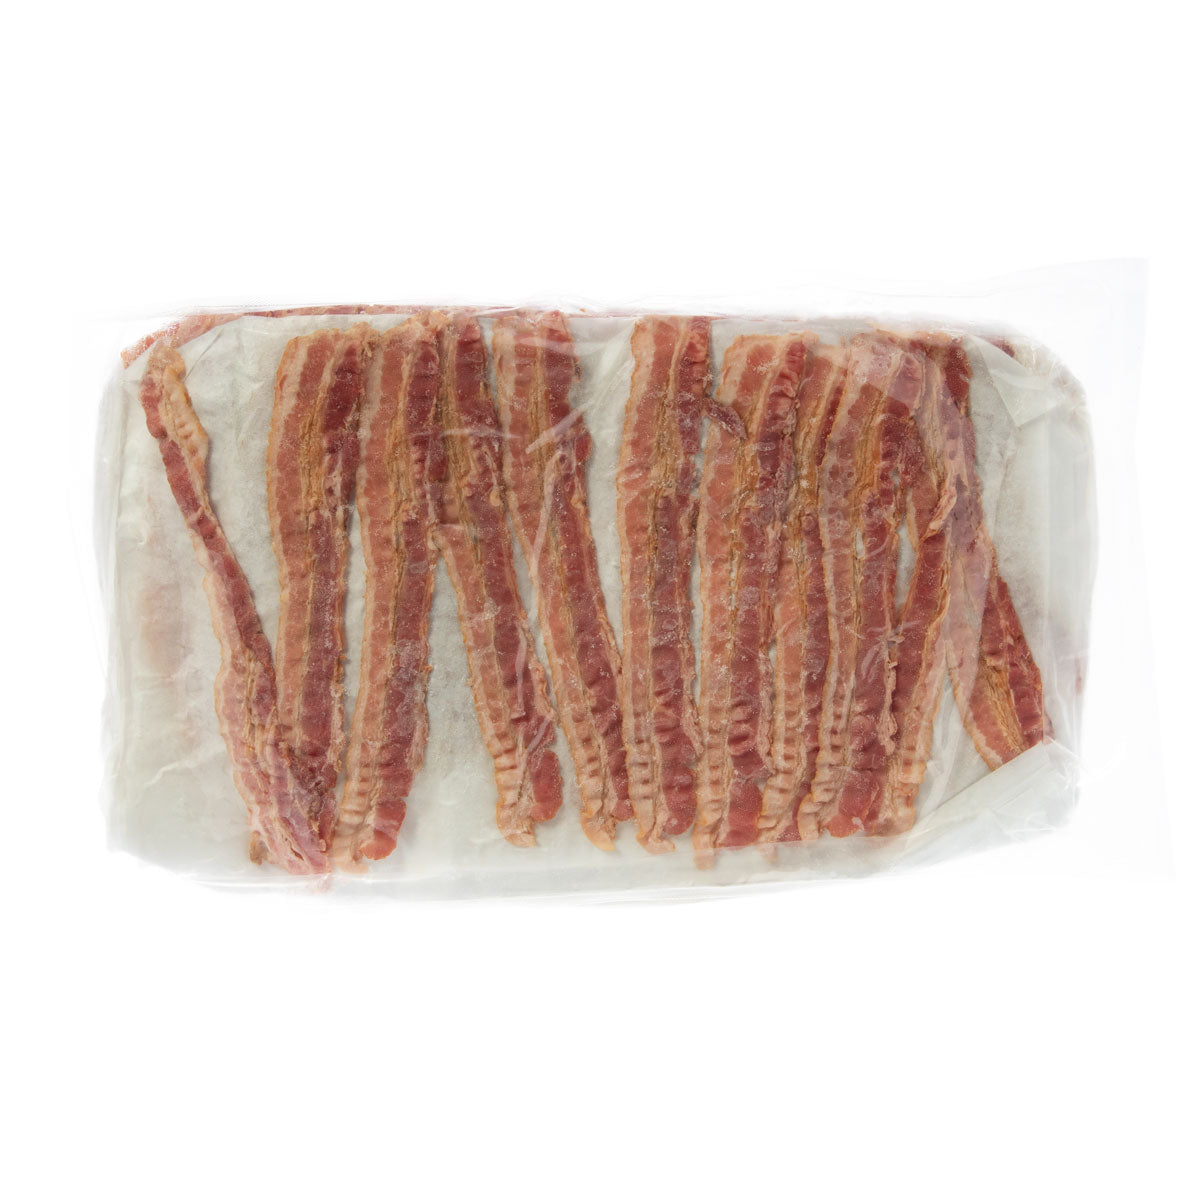 Niman Ranch Fully Cooked Layout Style Bacon